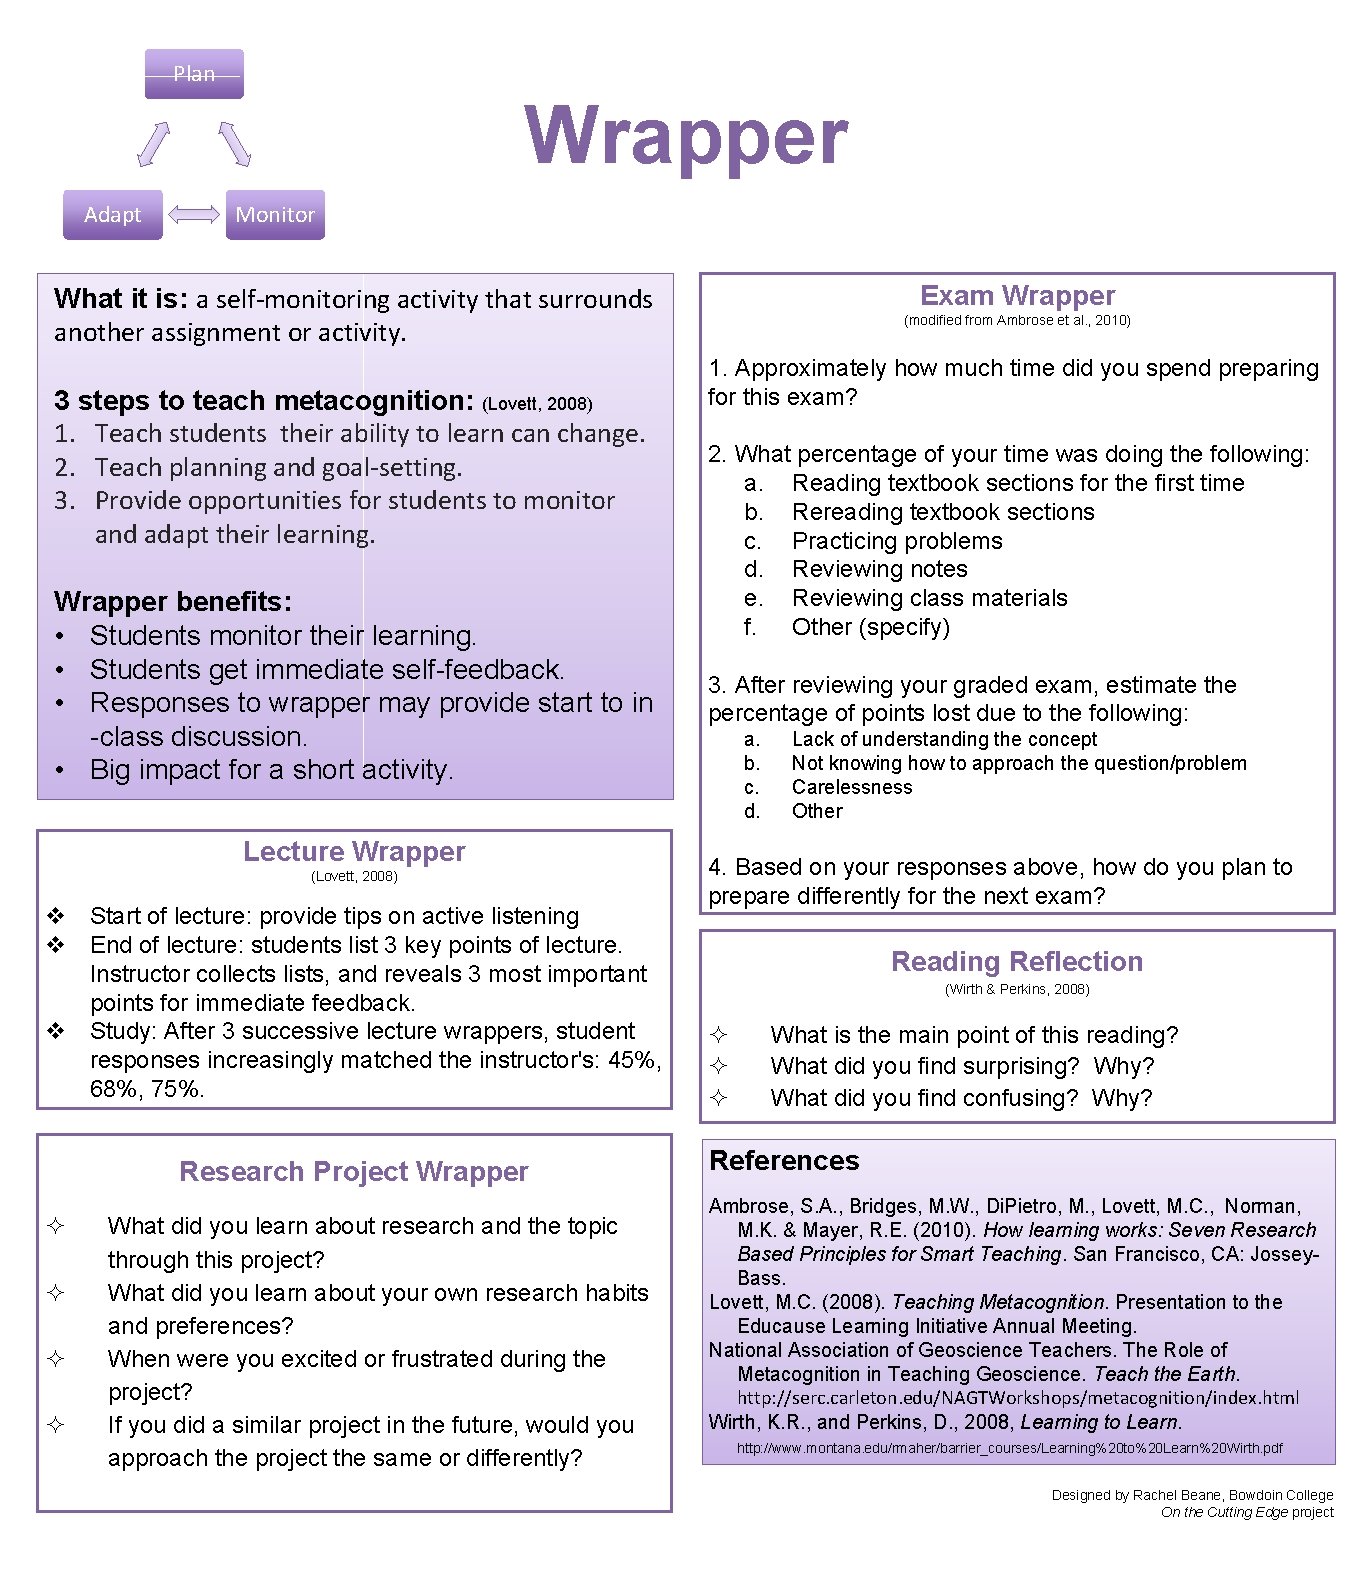 Plan Wrapper Adapt Monitor Exam Wrapper What it is: a self-monitoring activity that surrounds